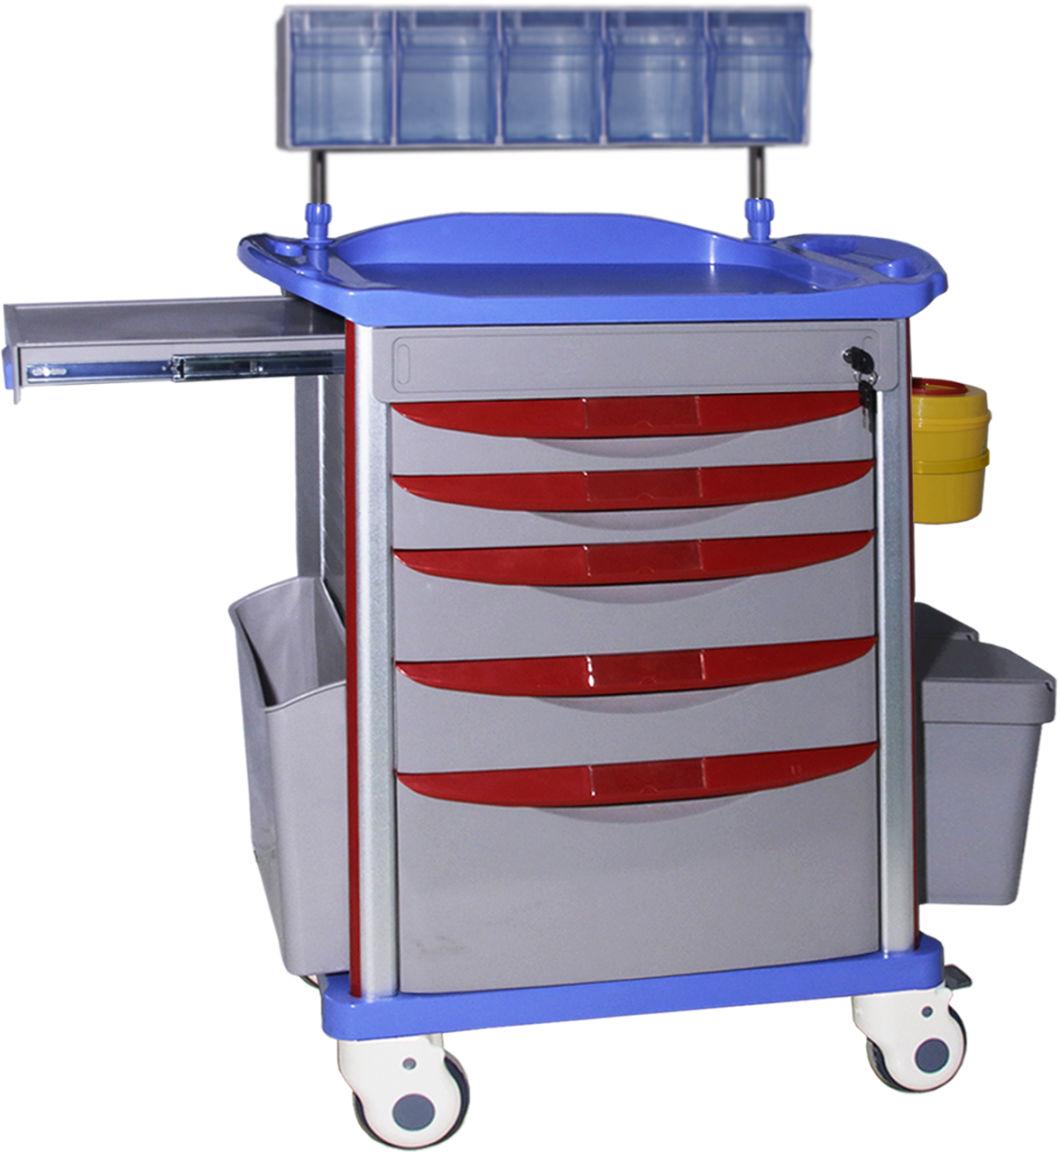 Mn-AC003 Multifunction Rescue Nursing ABS Treatment Trolley for ICU Operating Room